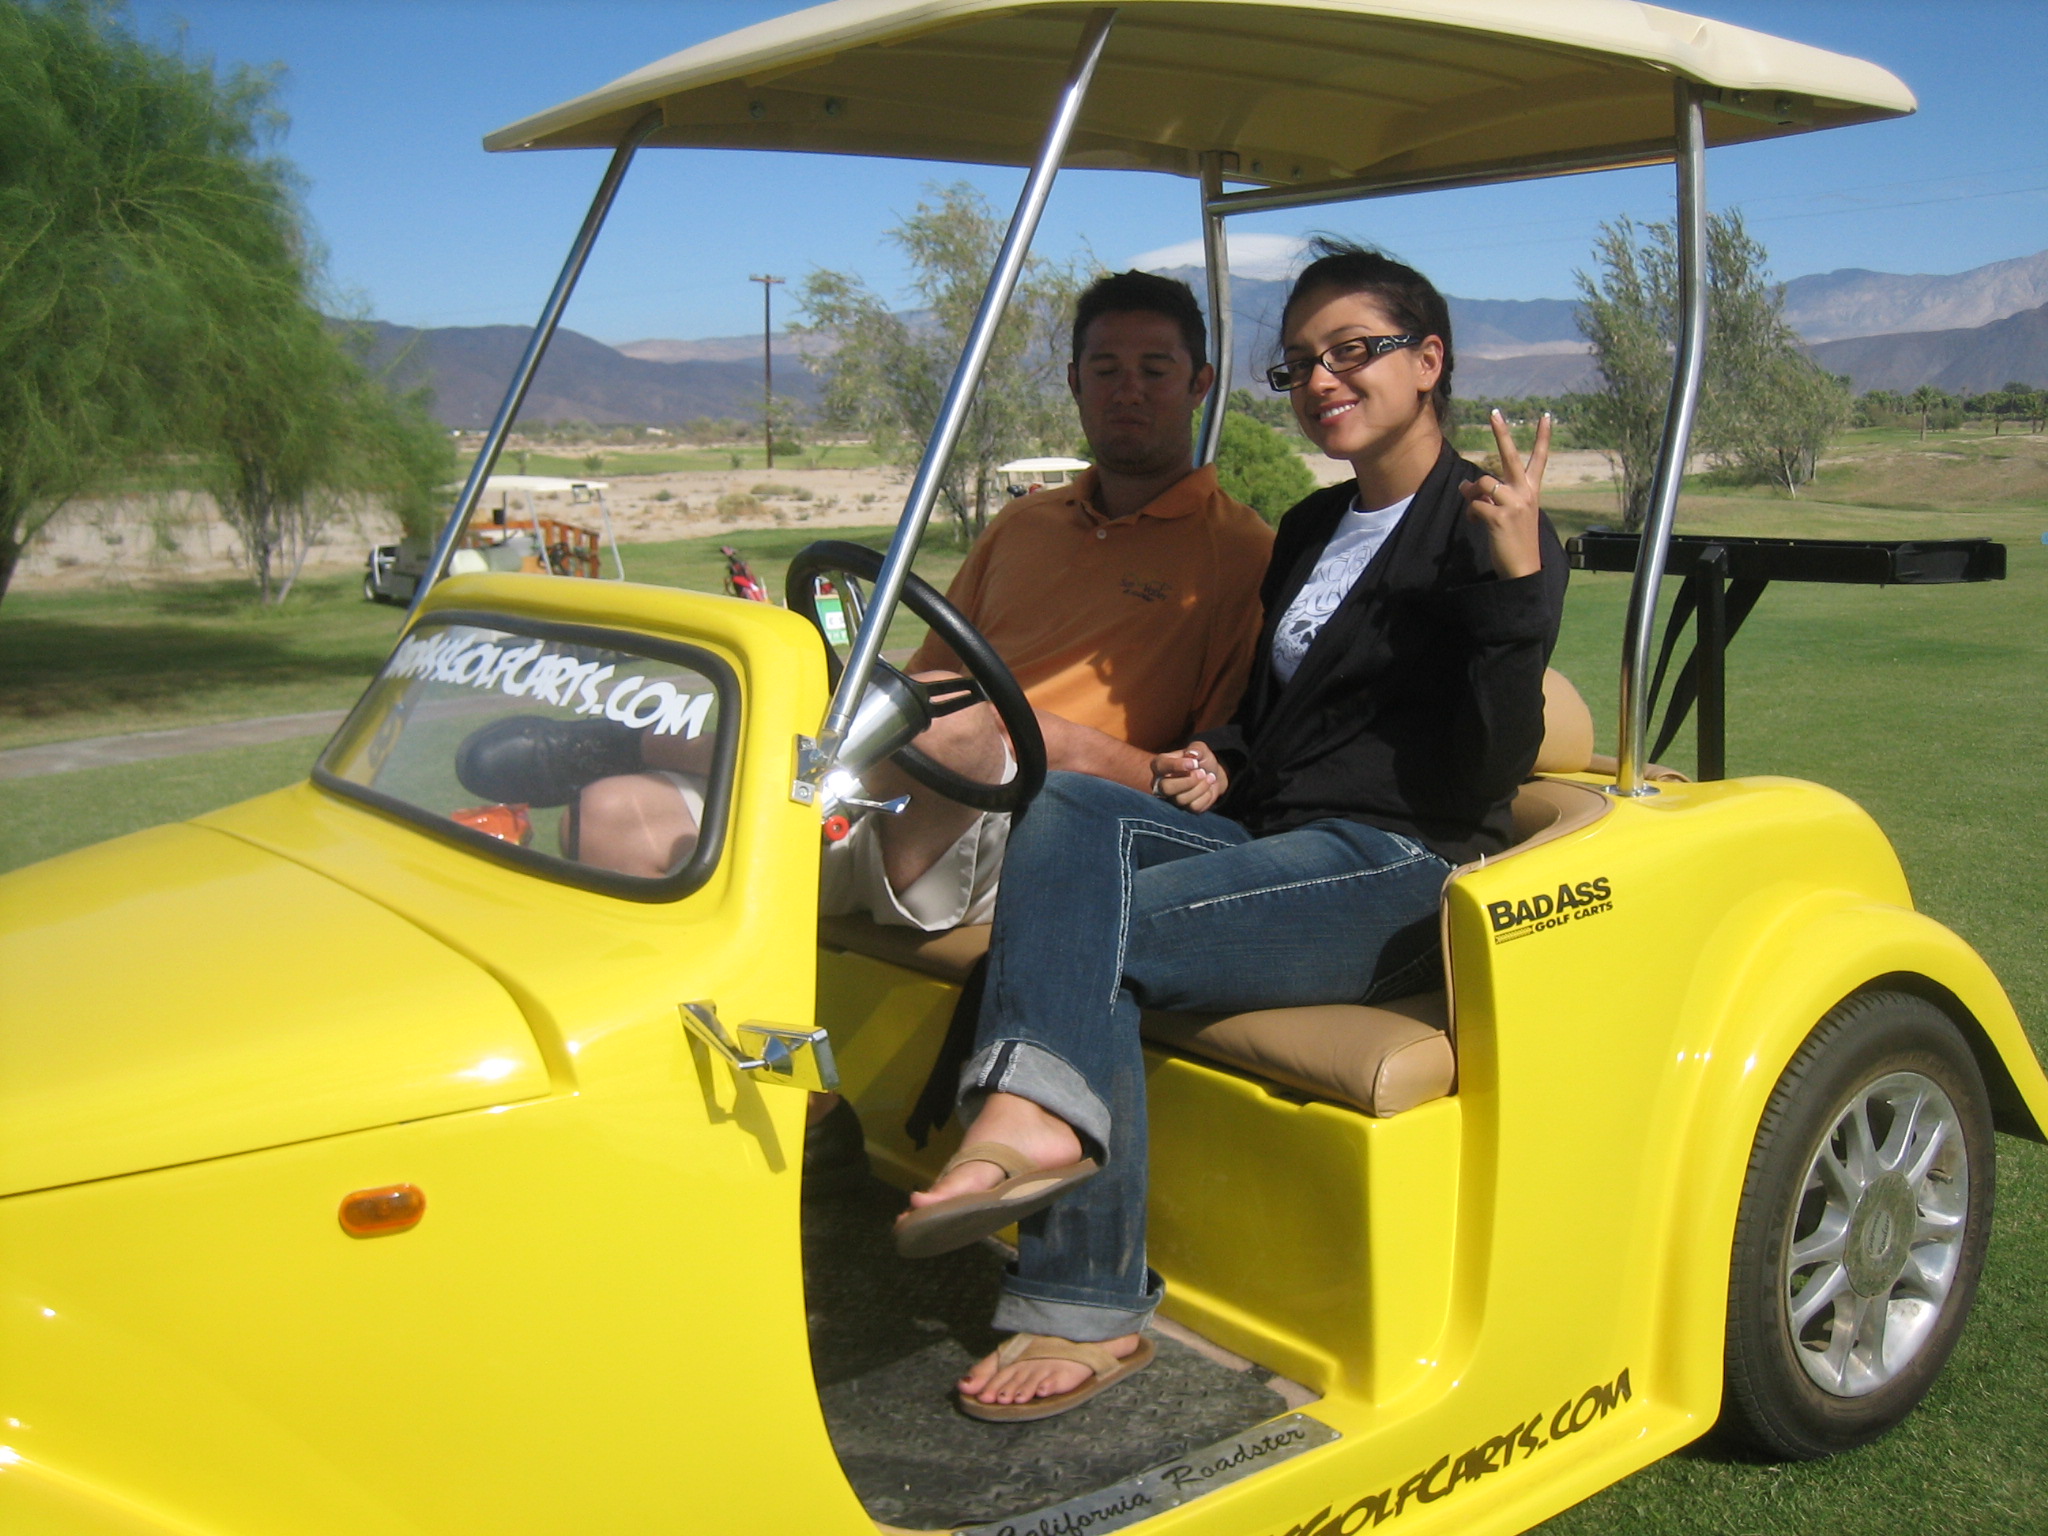 Mike Cortes and Brise Maine on the set of Hole in One.